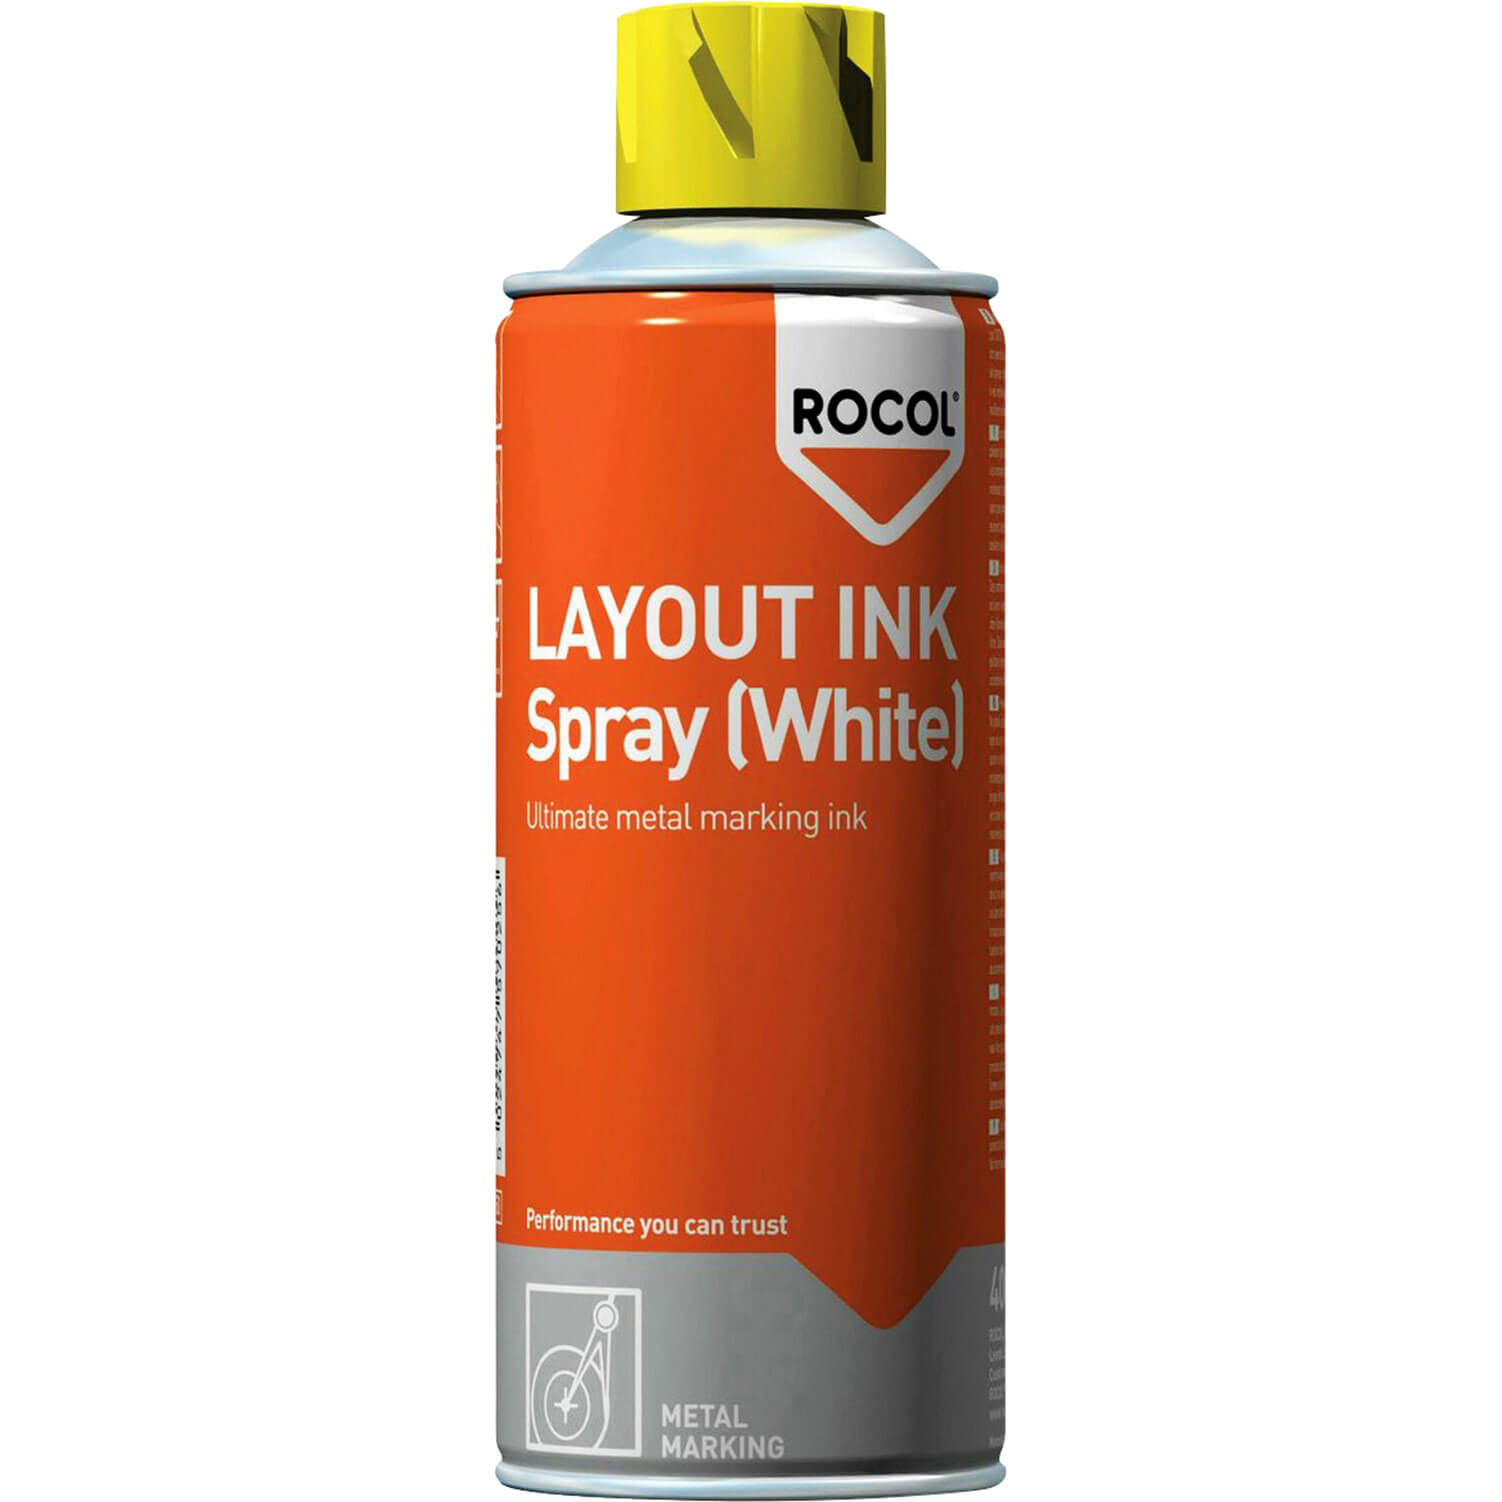 Image of Rocol Layout Ink Spray White 400ml